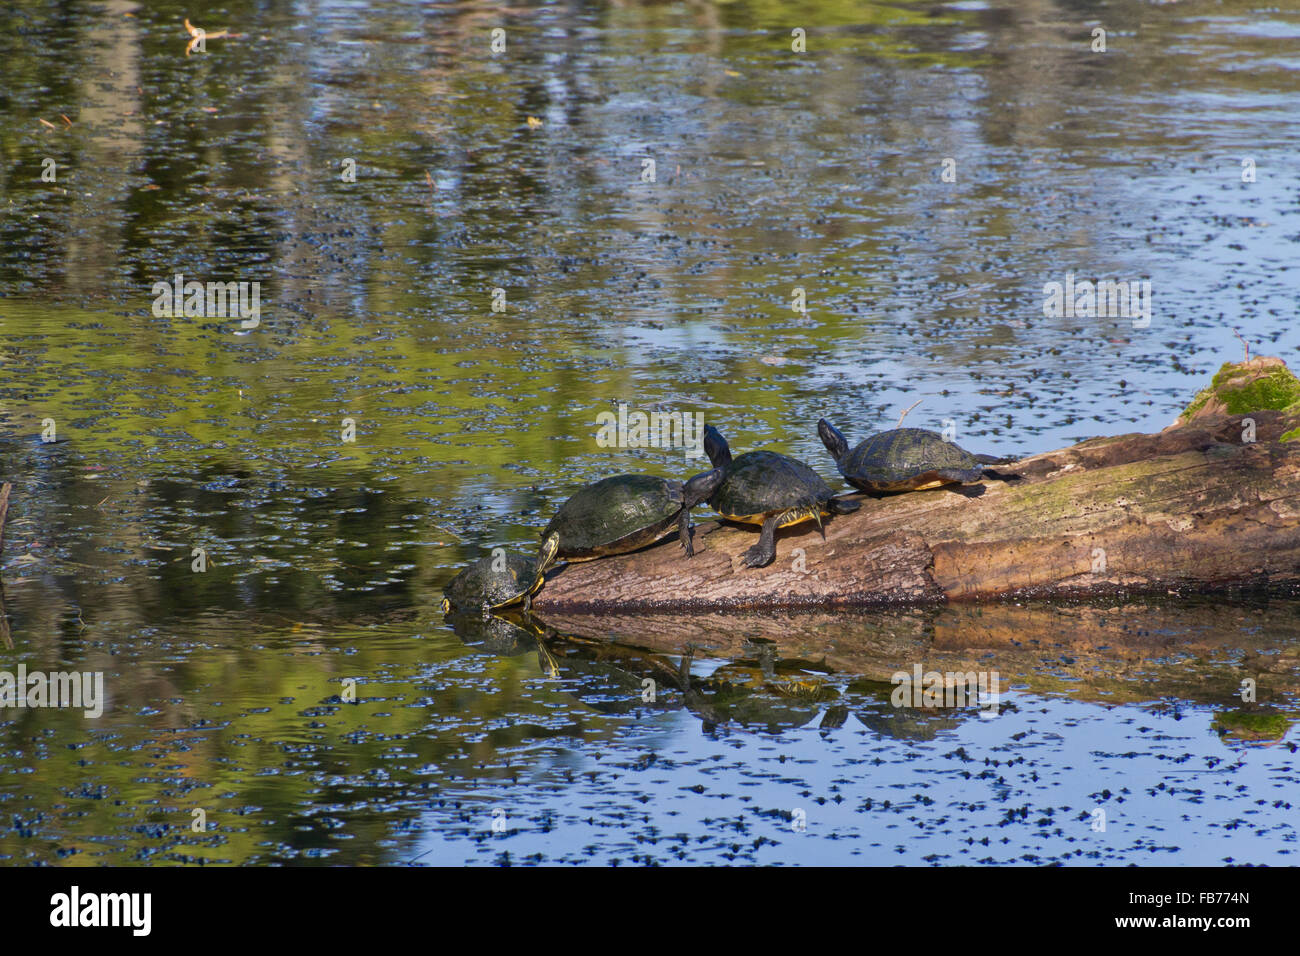 Three turtles rest on a reflective pond log while the fourth pulls itself out of the water to join them Stock Photo